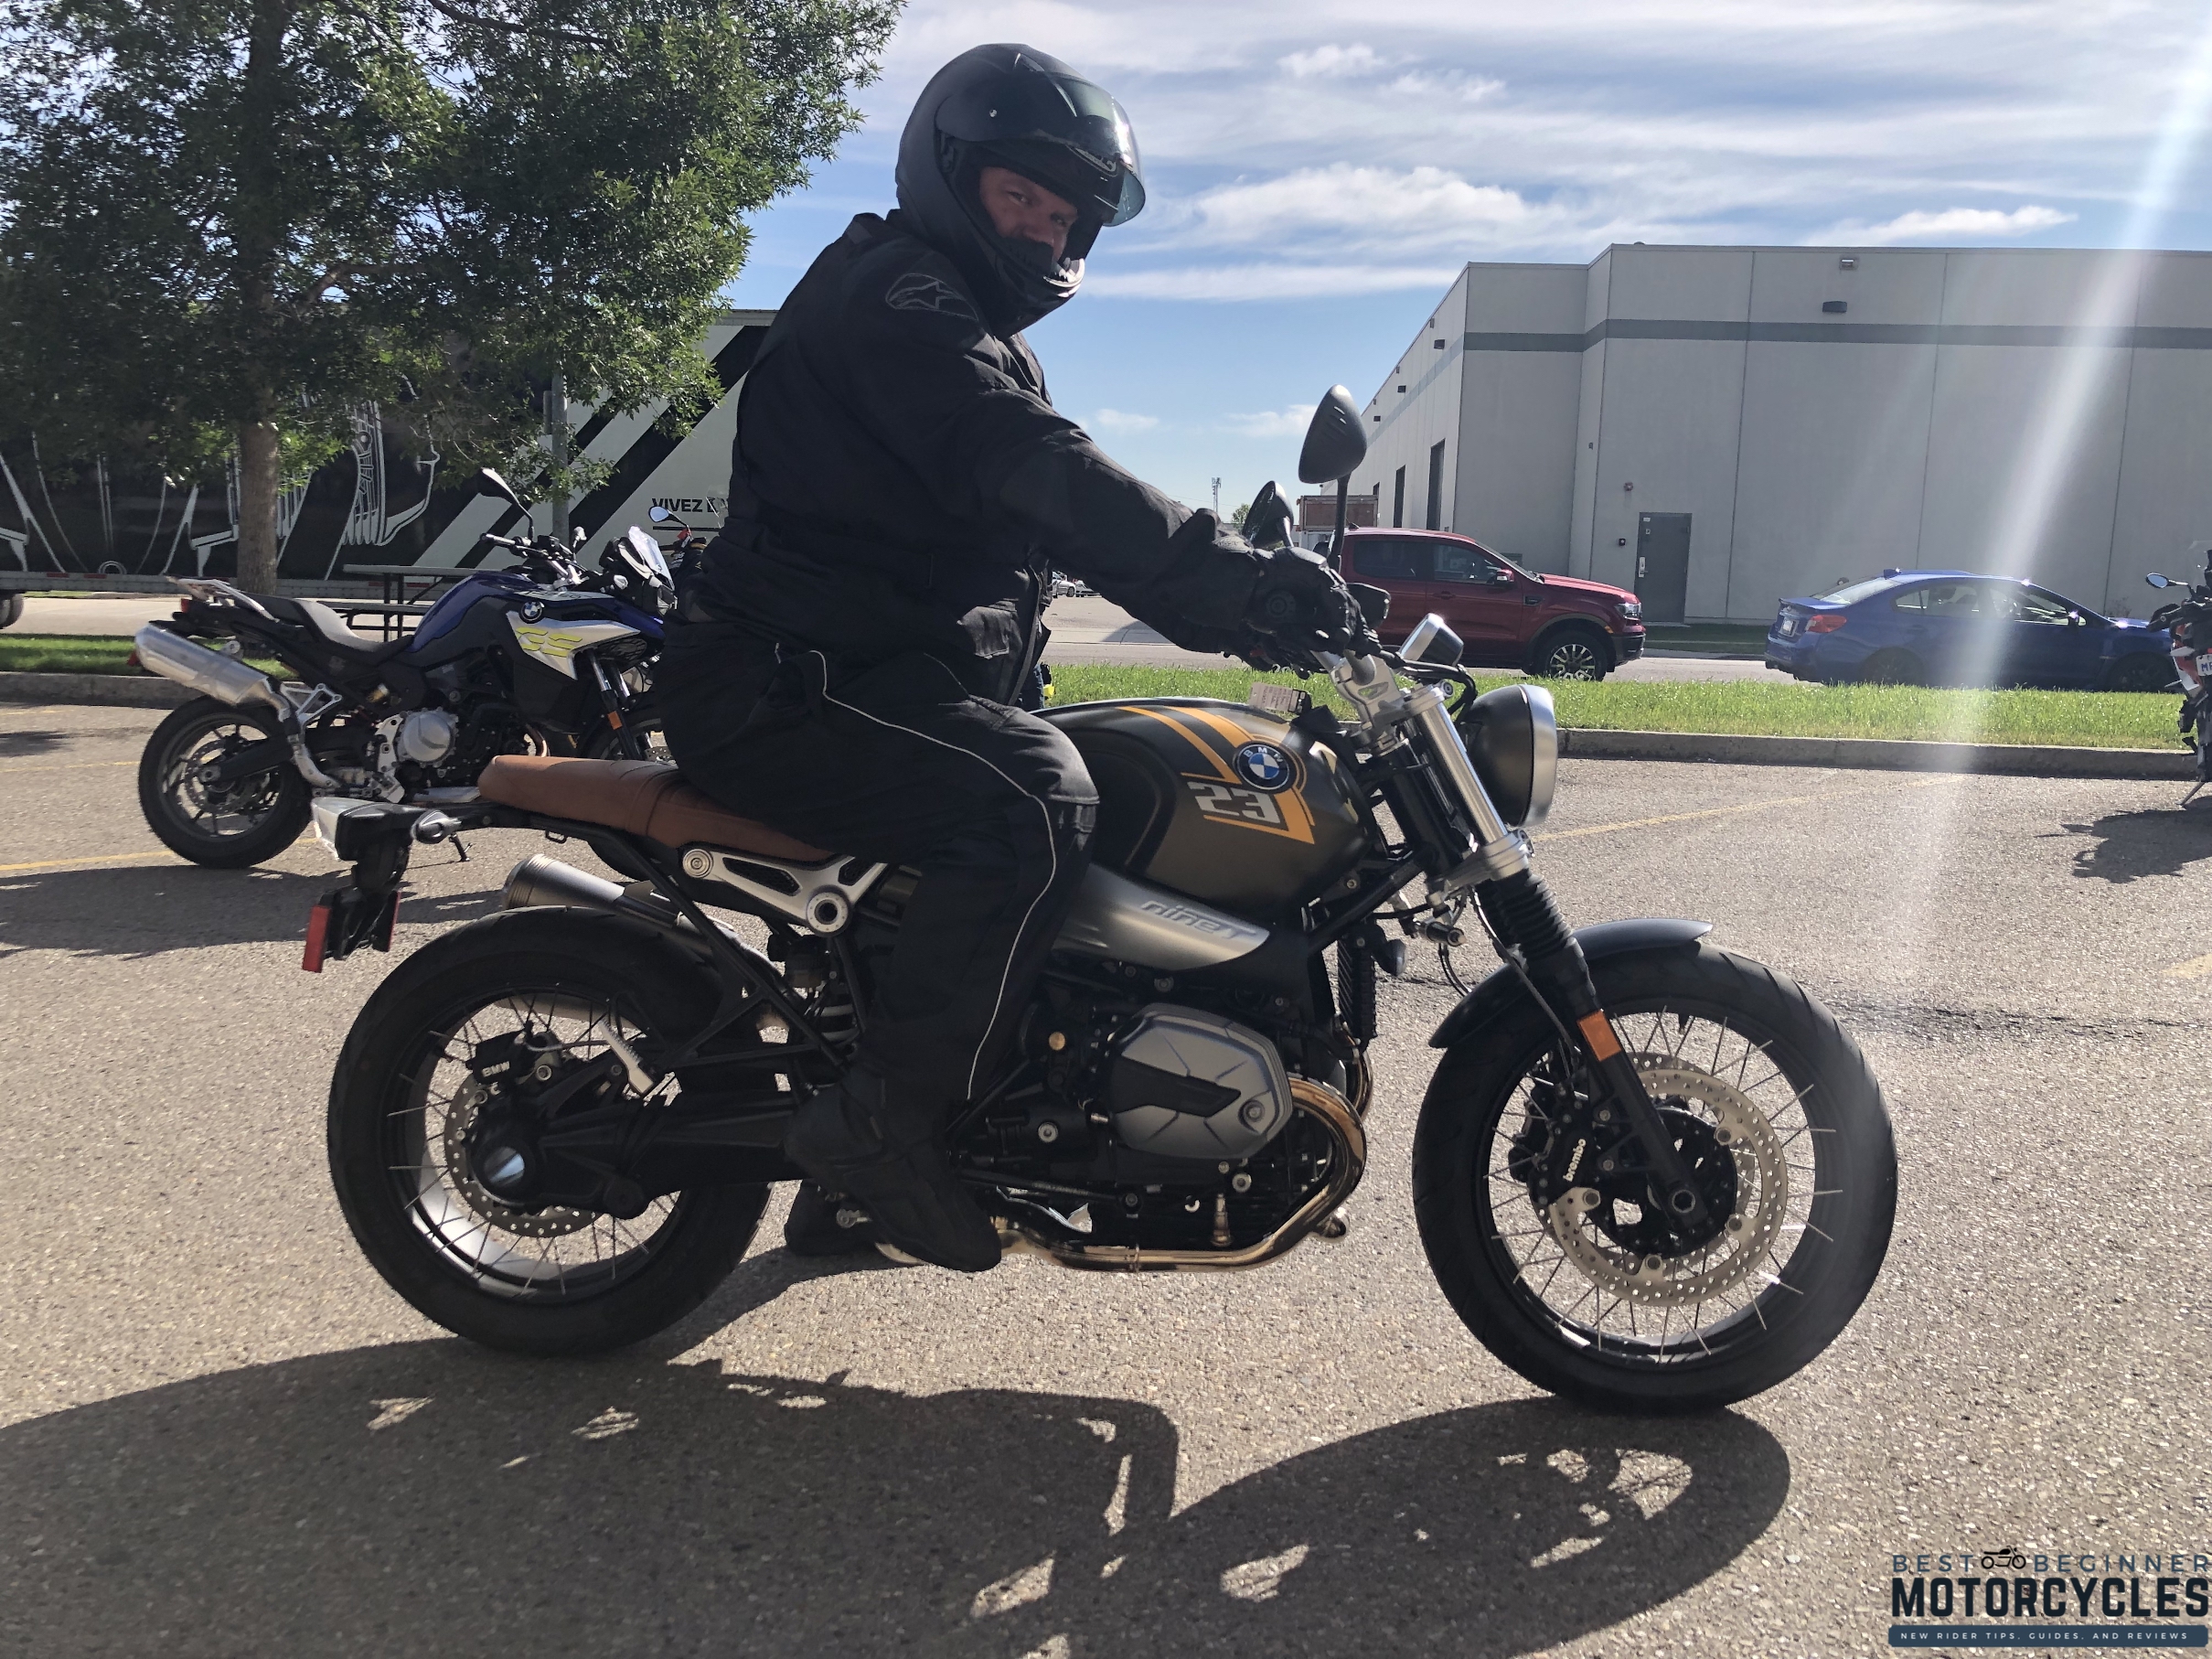 the author riding a 2021 BMW R NineT Scrambler during BMW Demo Days at Blackfoot Motorsports